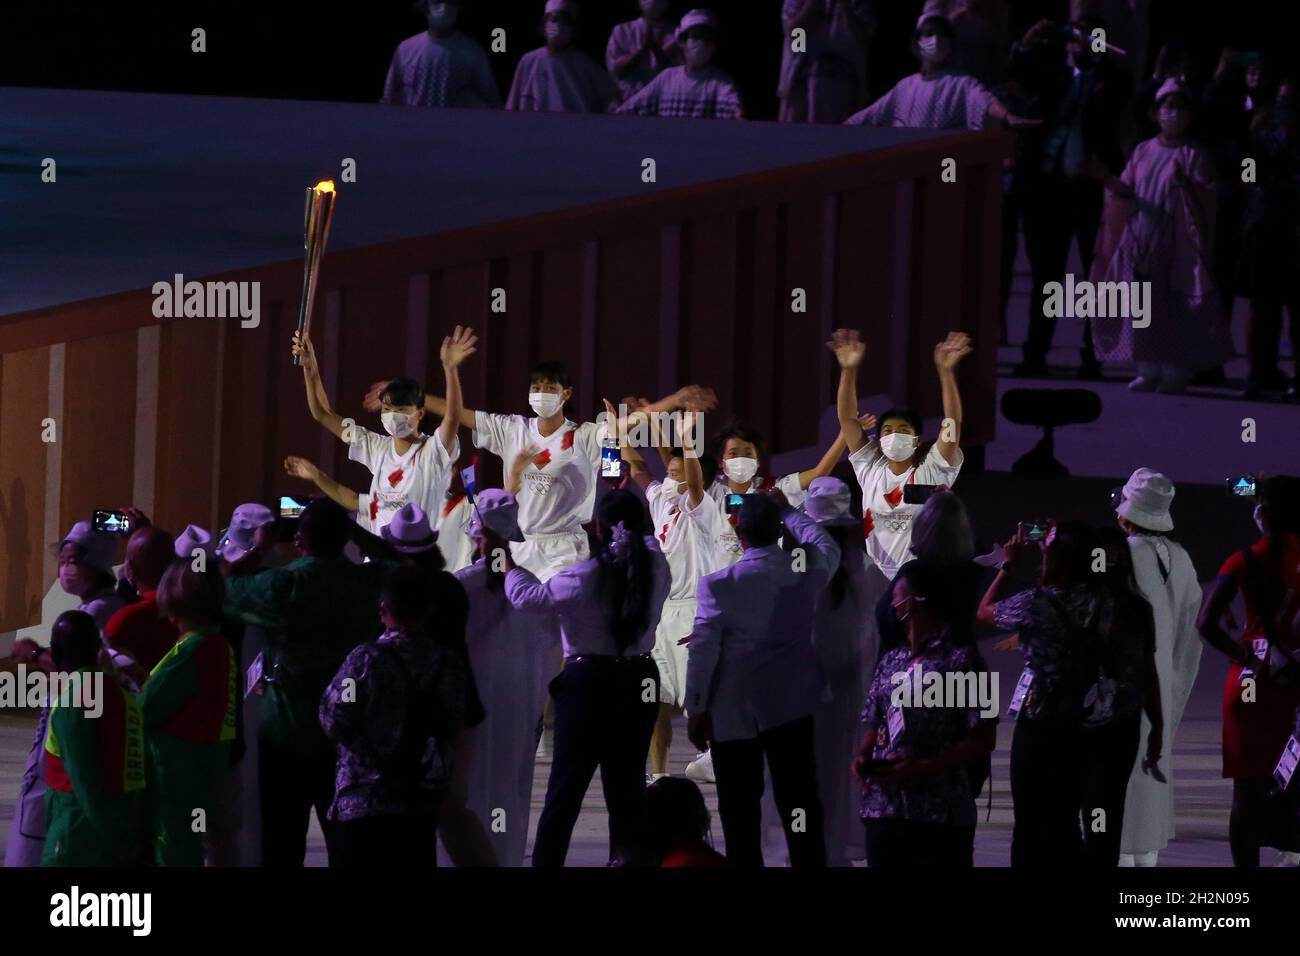 JULY 23rd, 2021 - TOKYO, JAPAN: The olympic flame is carried during the Opening Ceremony of the Tokyo 2020 Olympic Games by AOKI Kokona, NAKAZAWA Ren, Stock Photo